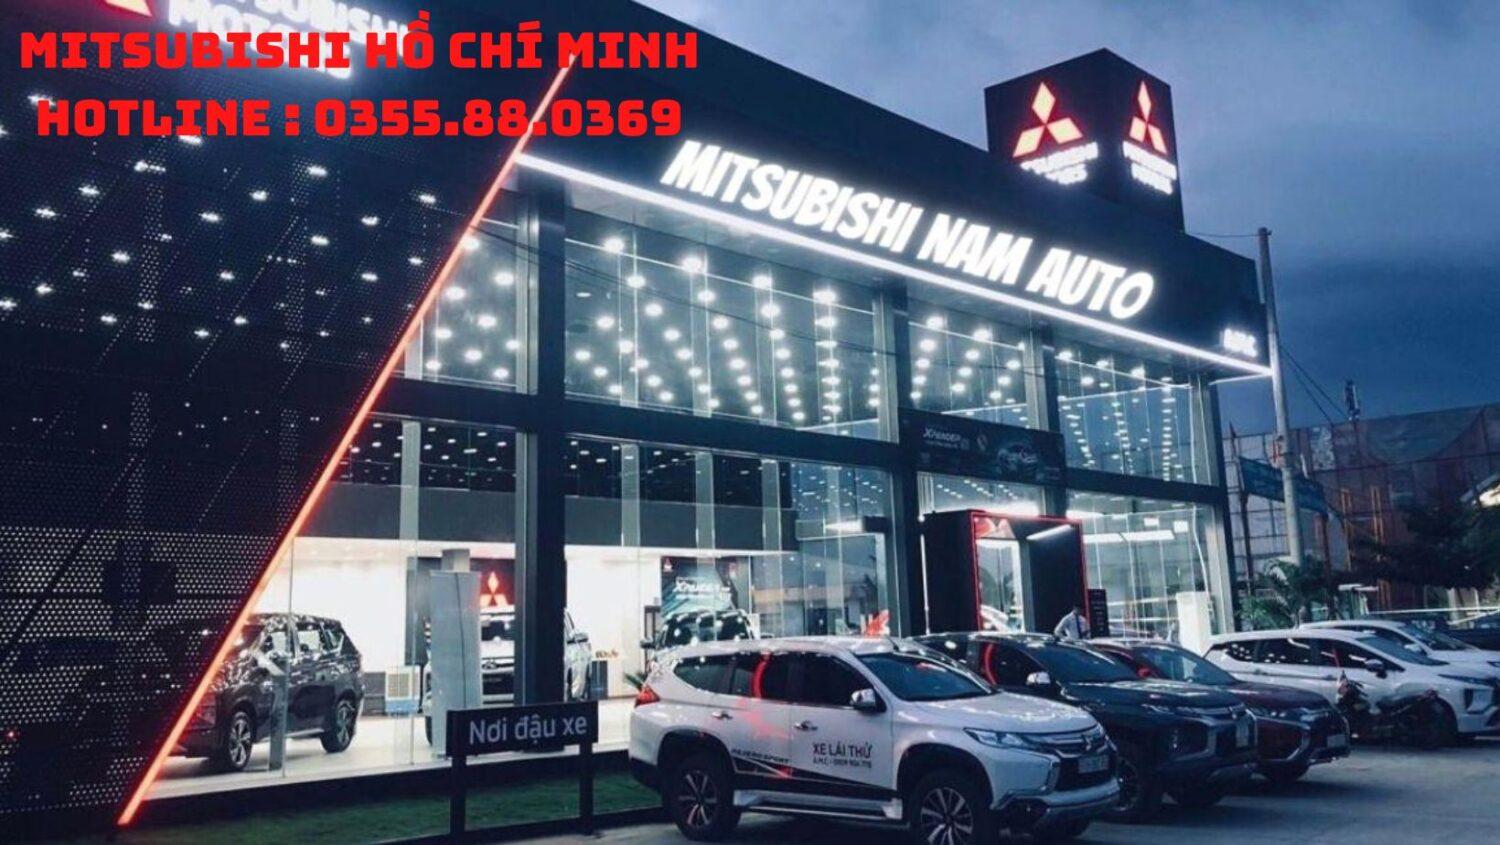 Read more about the article MITSUBISHI HỒ CHÍ MINH QUẬN 7